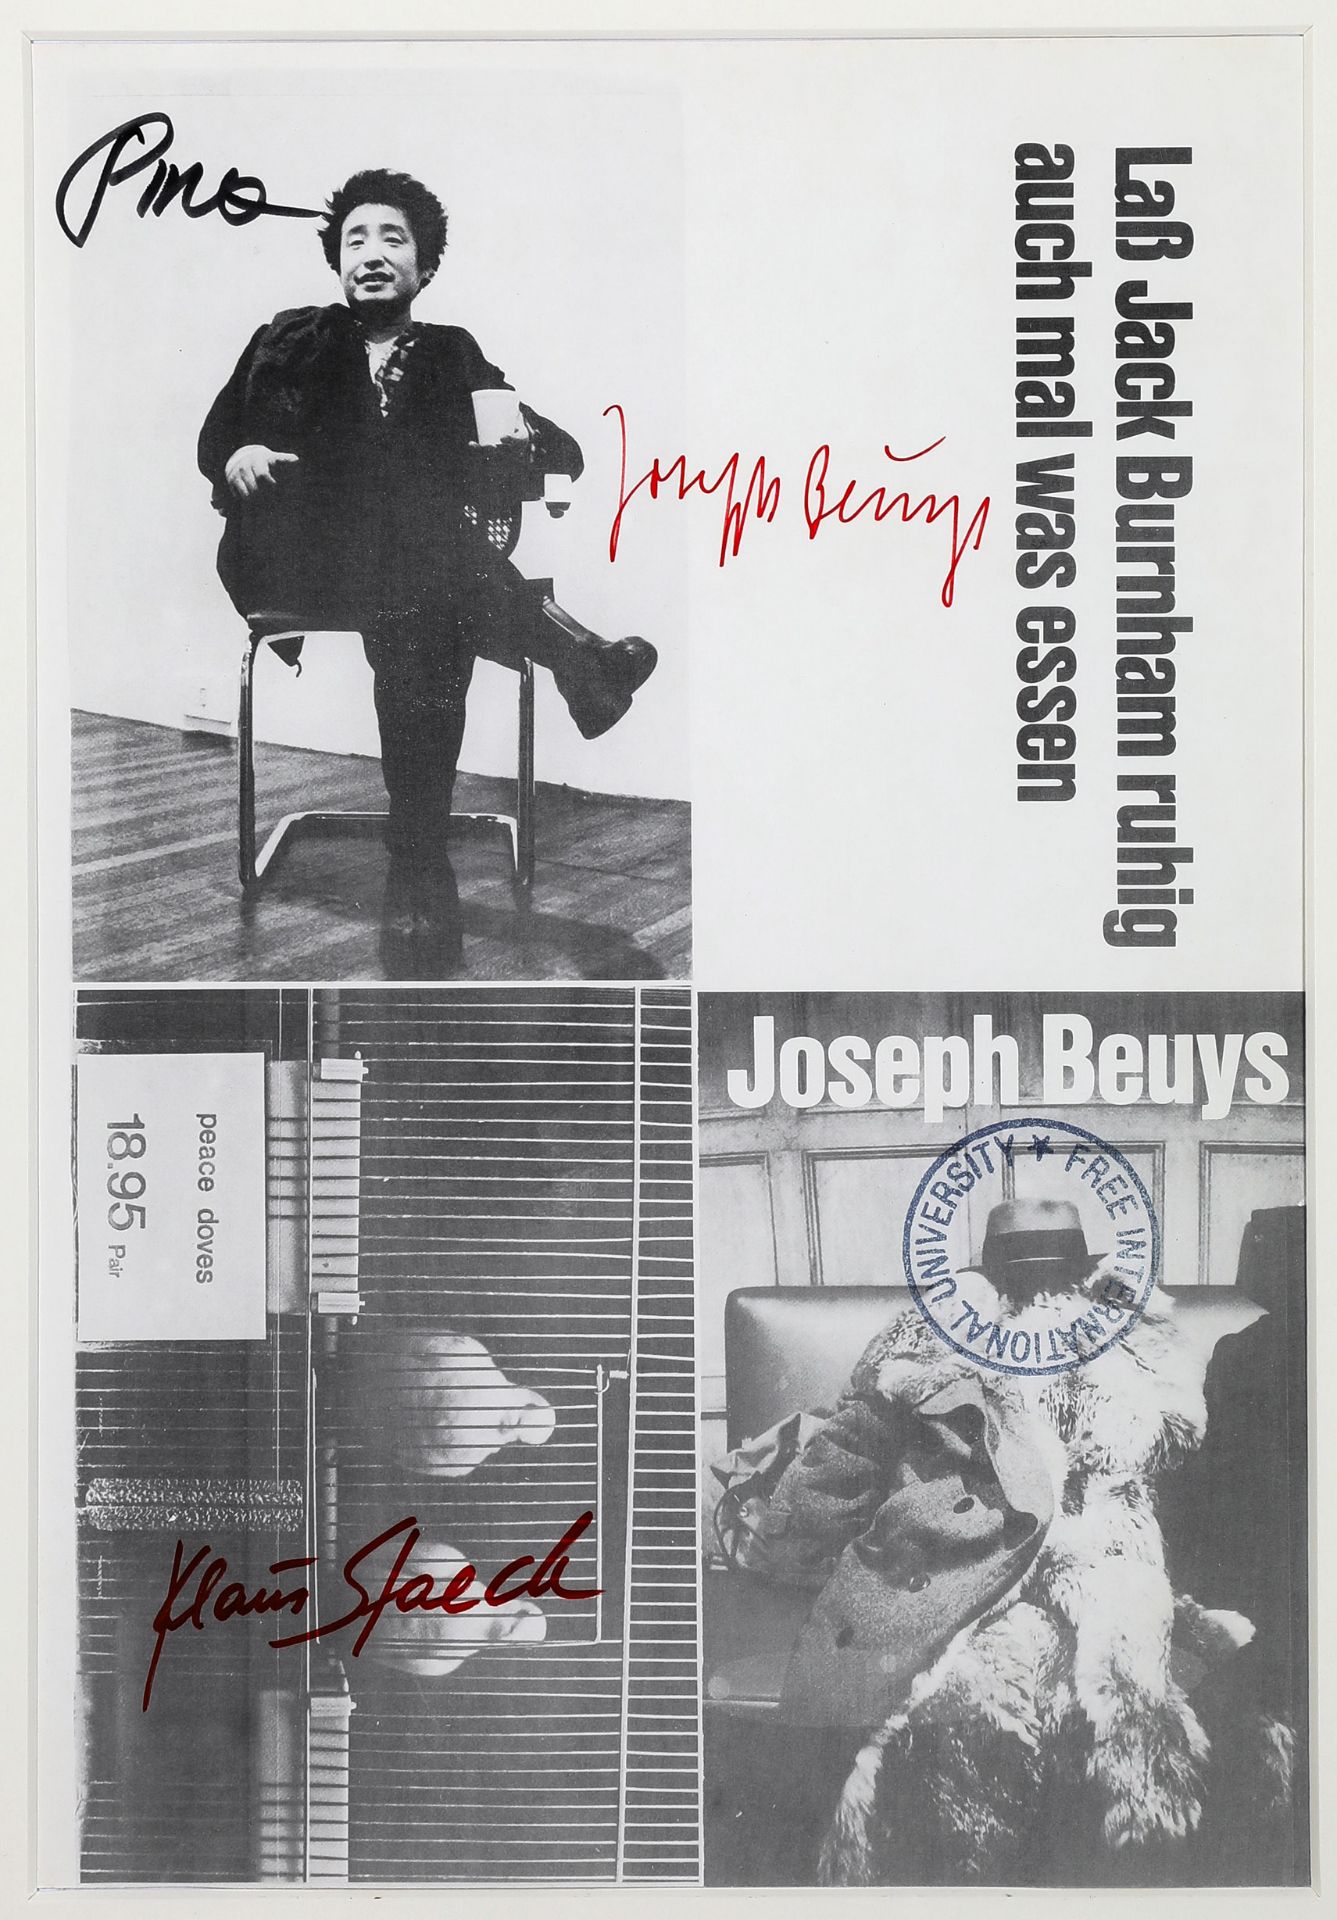 Joseph Beuys*, Klaus Staeck, Nam June Paik, signed proof for postcards, 1974